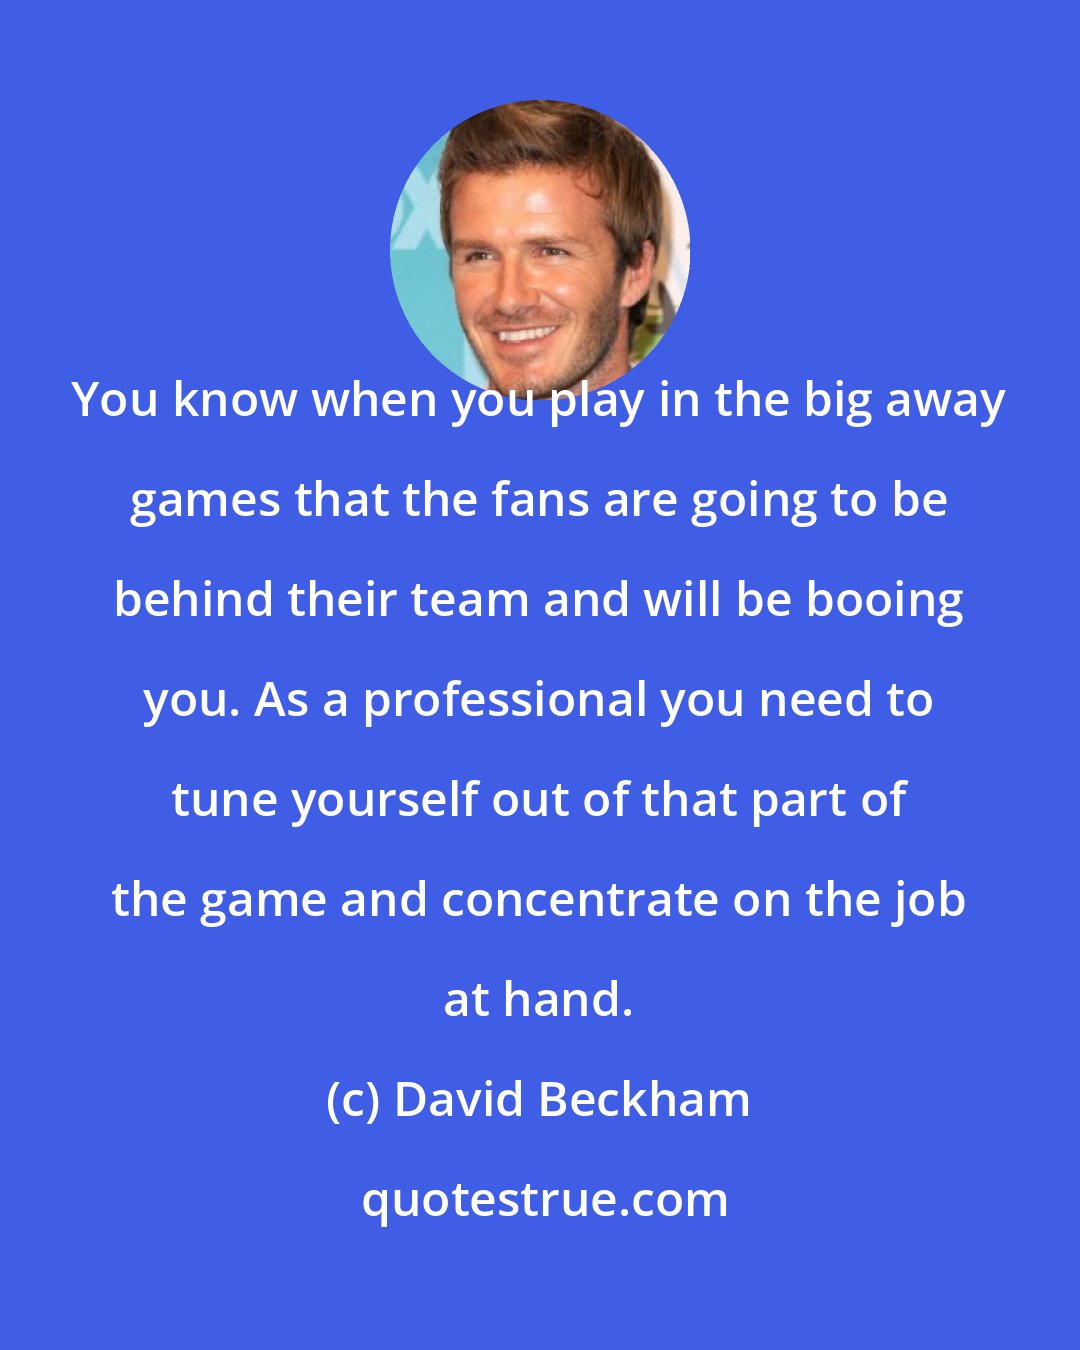 David Beckham: You know when you play in the big away games that the fans are going to be behind their team and will be booing you. As a professional you need to tune yourself out of that part of the game and concentrate on the job at hand.